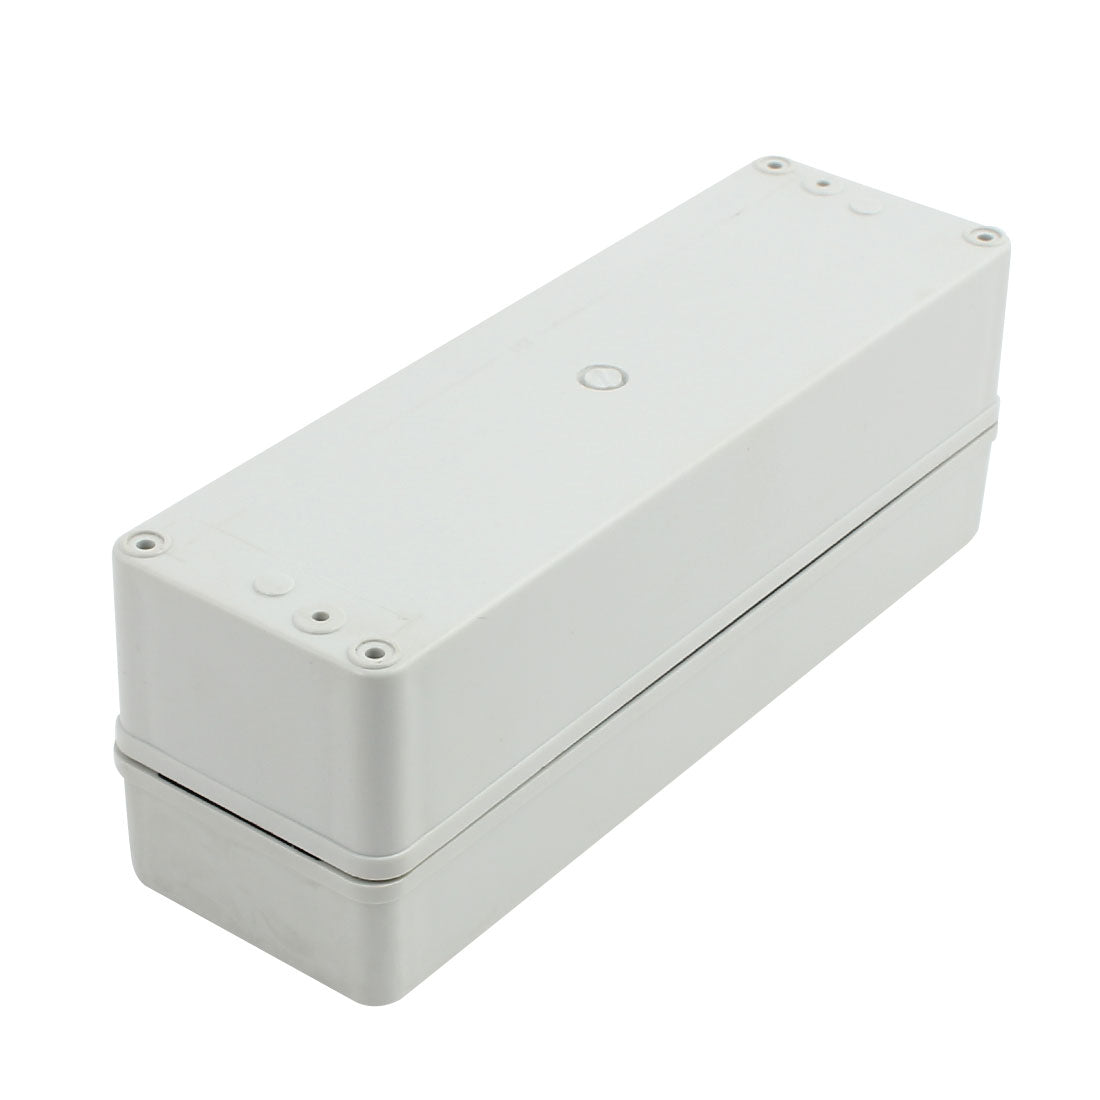 uxcell Uxcell 250mm x 80mm x 85mm Dustproof IP65 Junction Box DIY Case Enclosure Gray